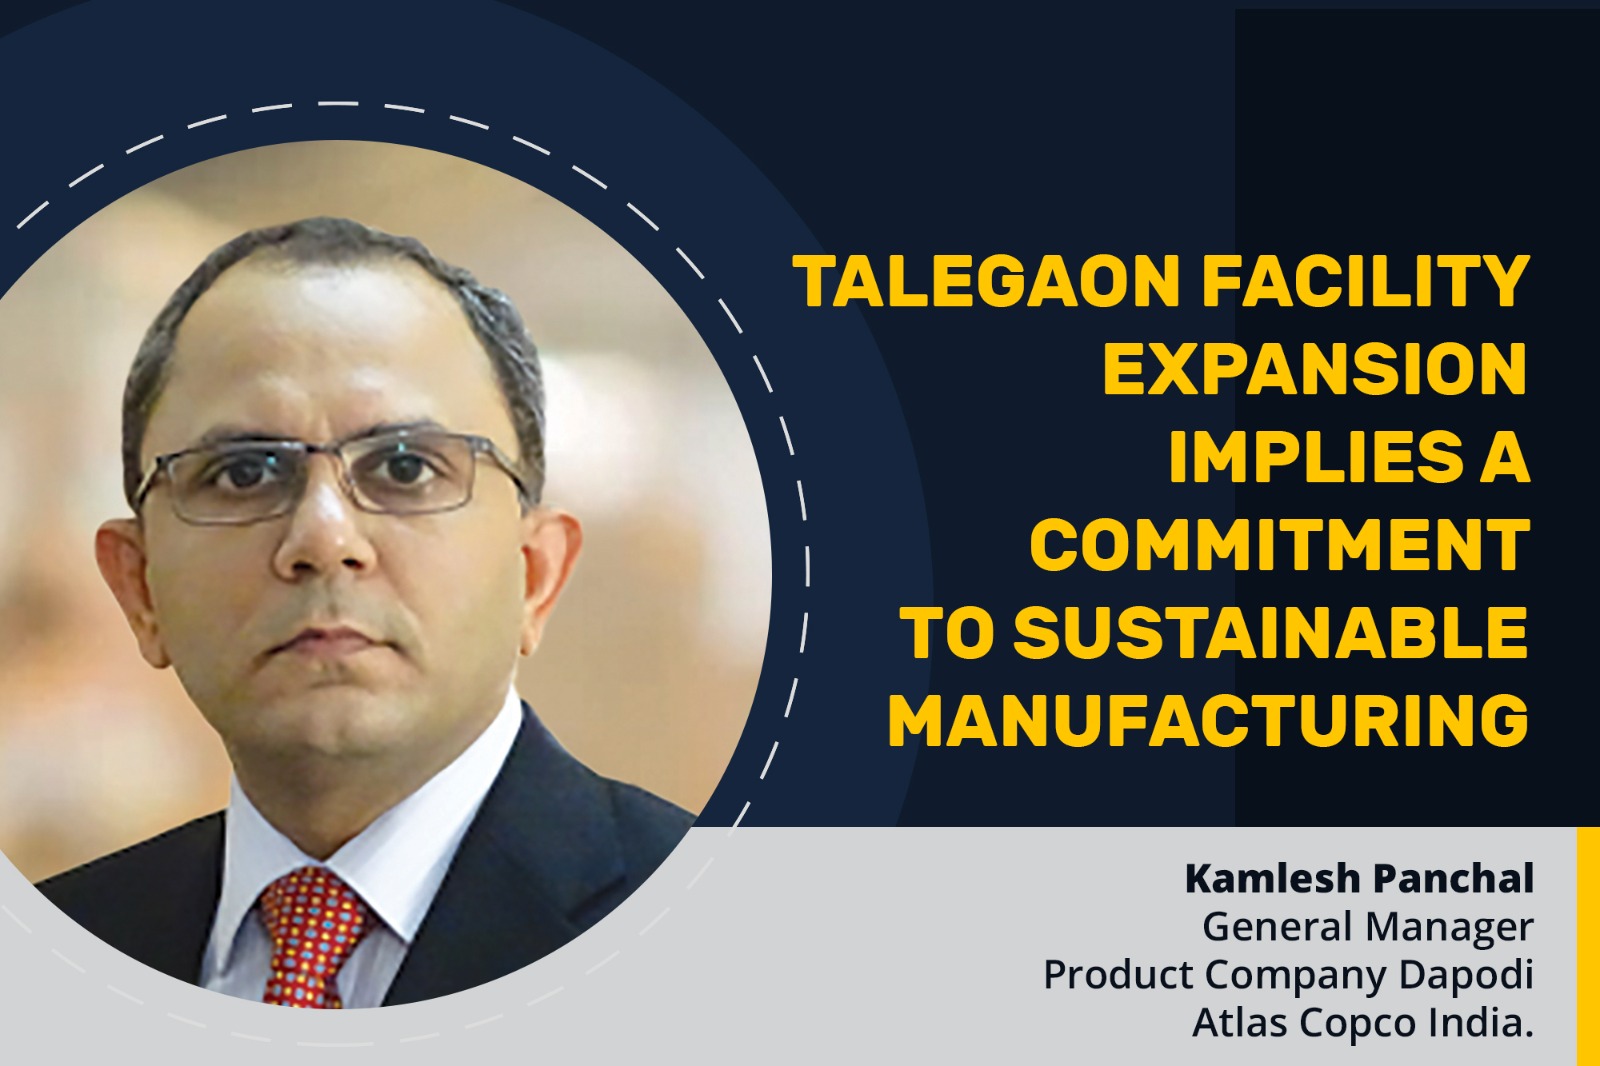 Talegaon facility expansion implies a commitment to sustainable manufacturing